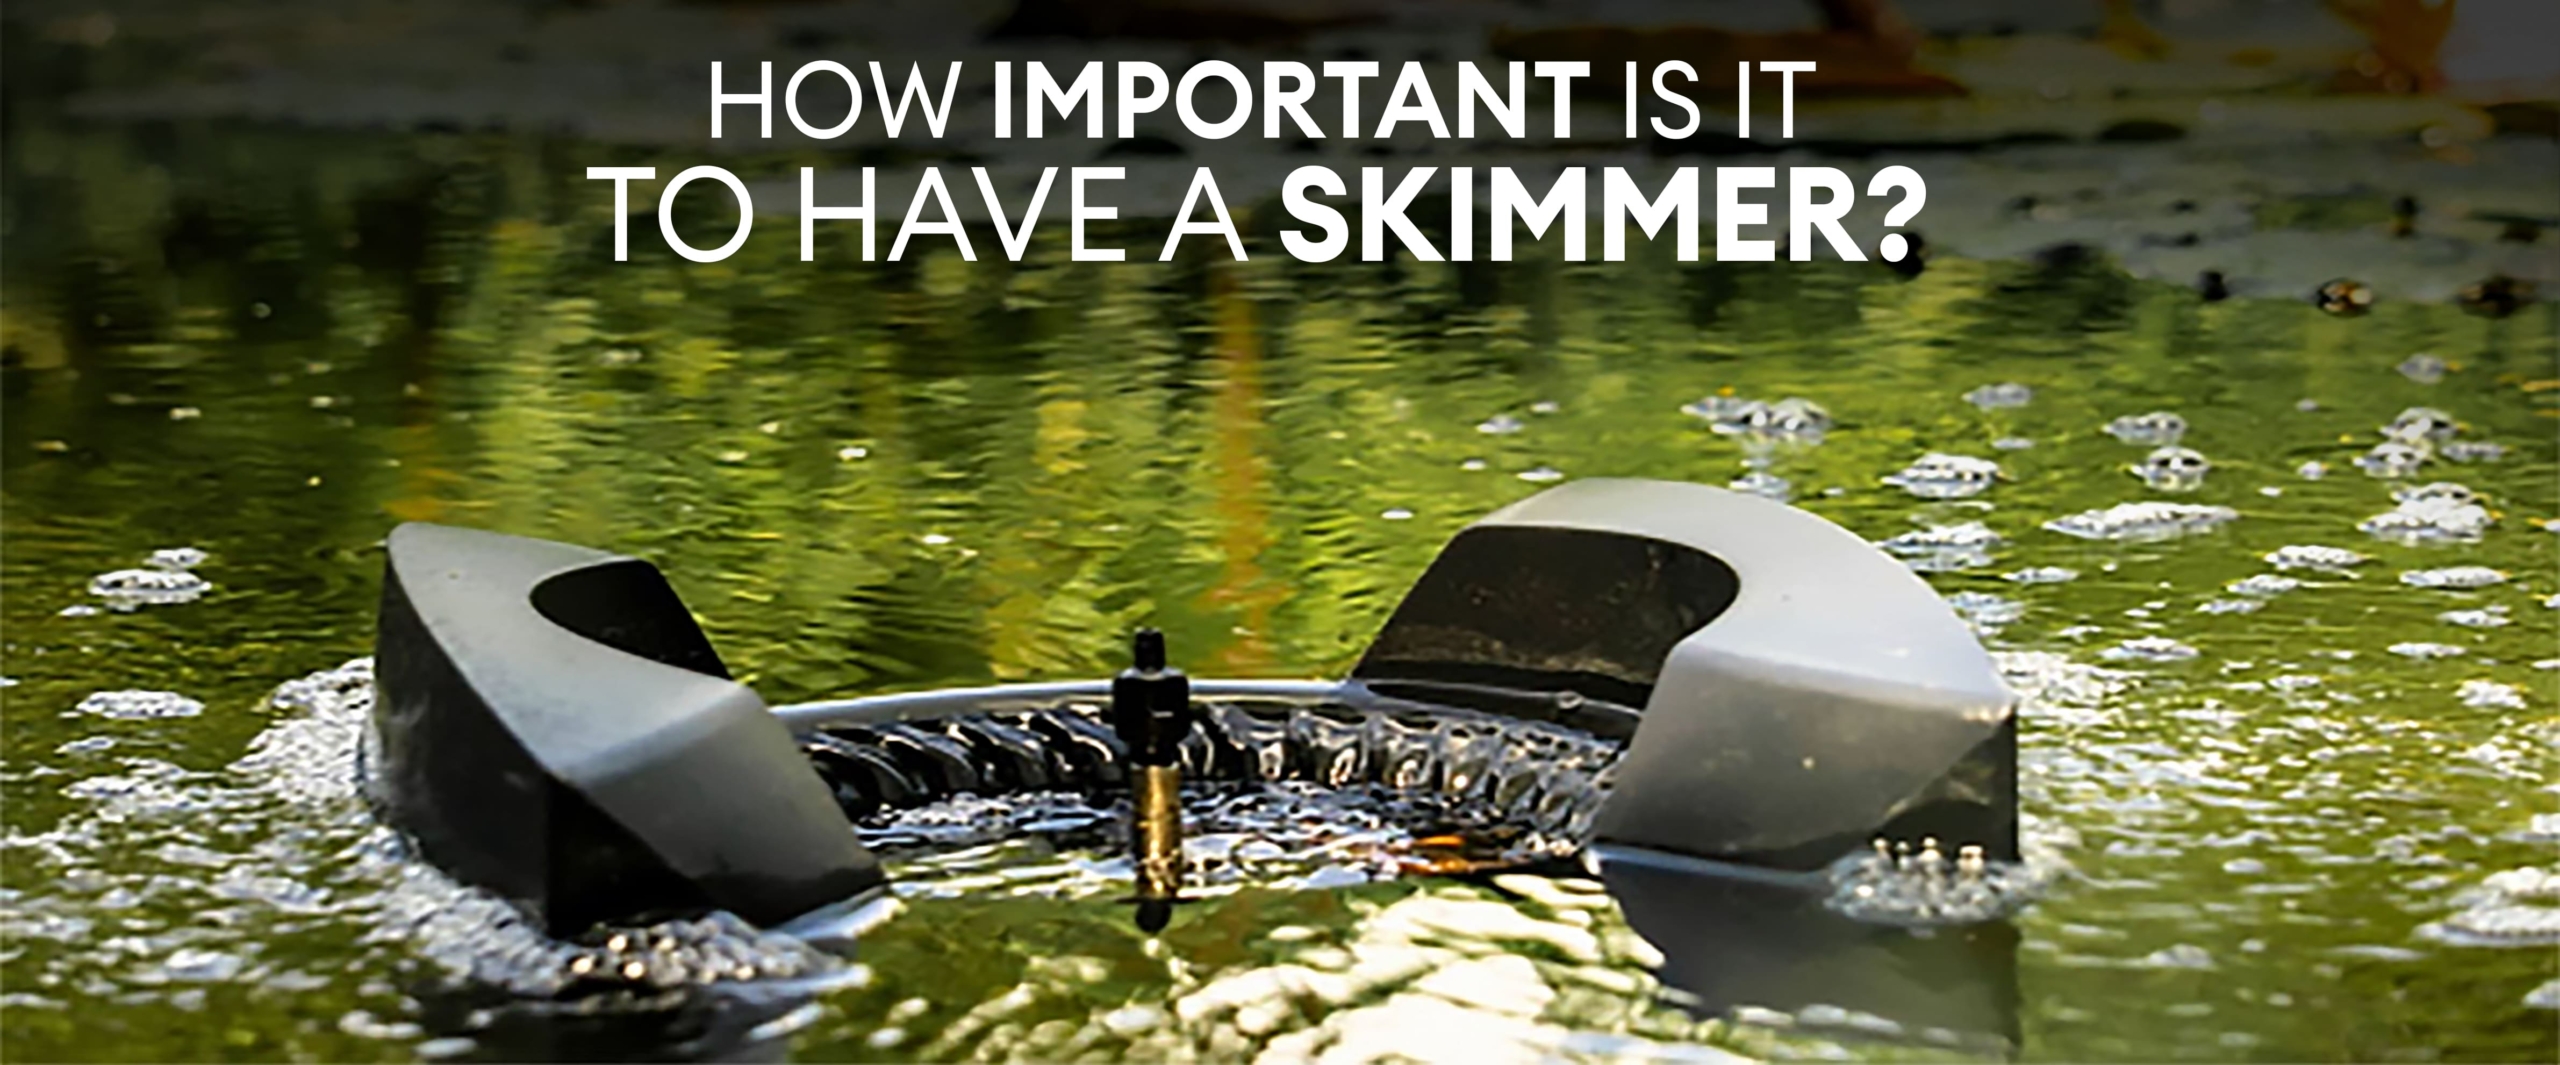 How important is it to have a skimmer-min